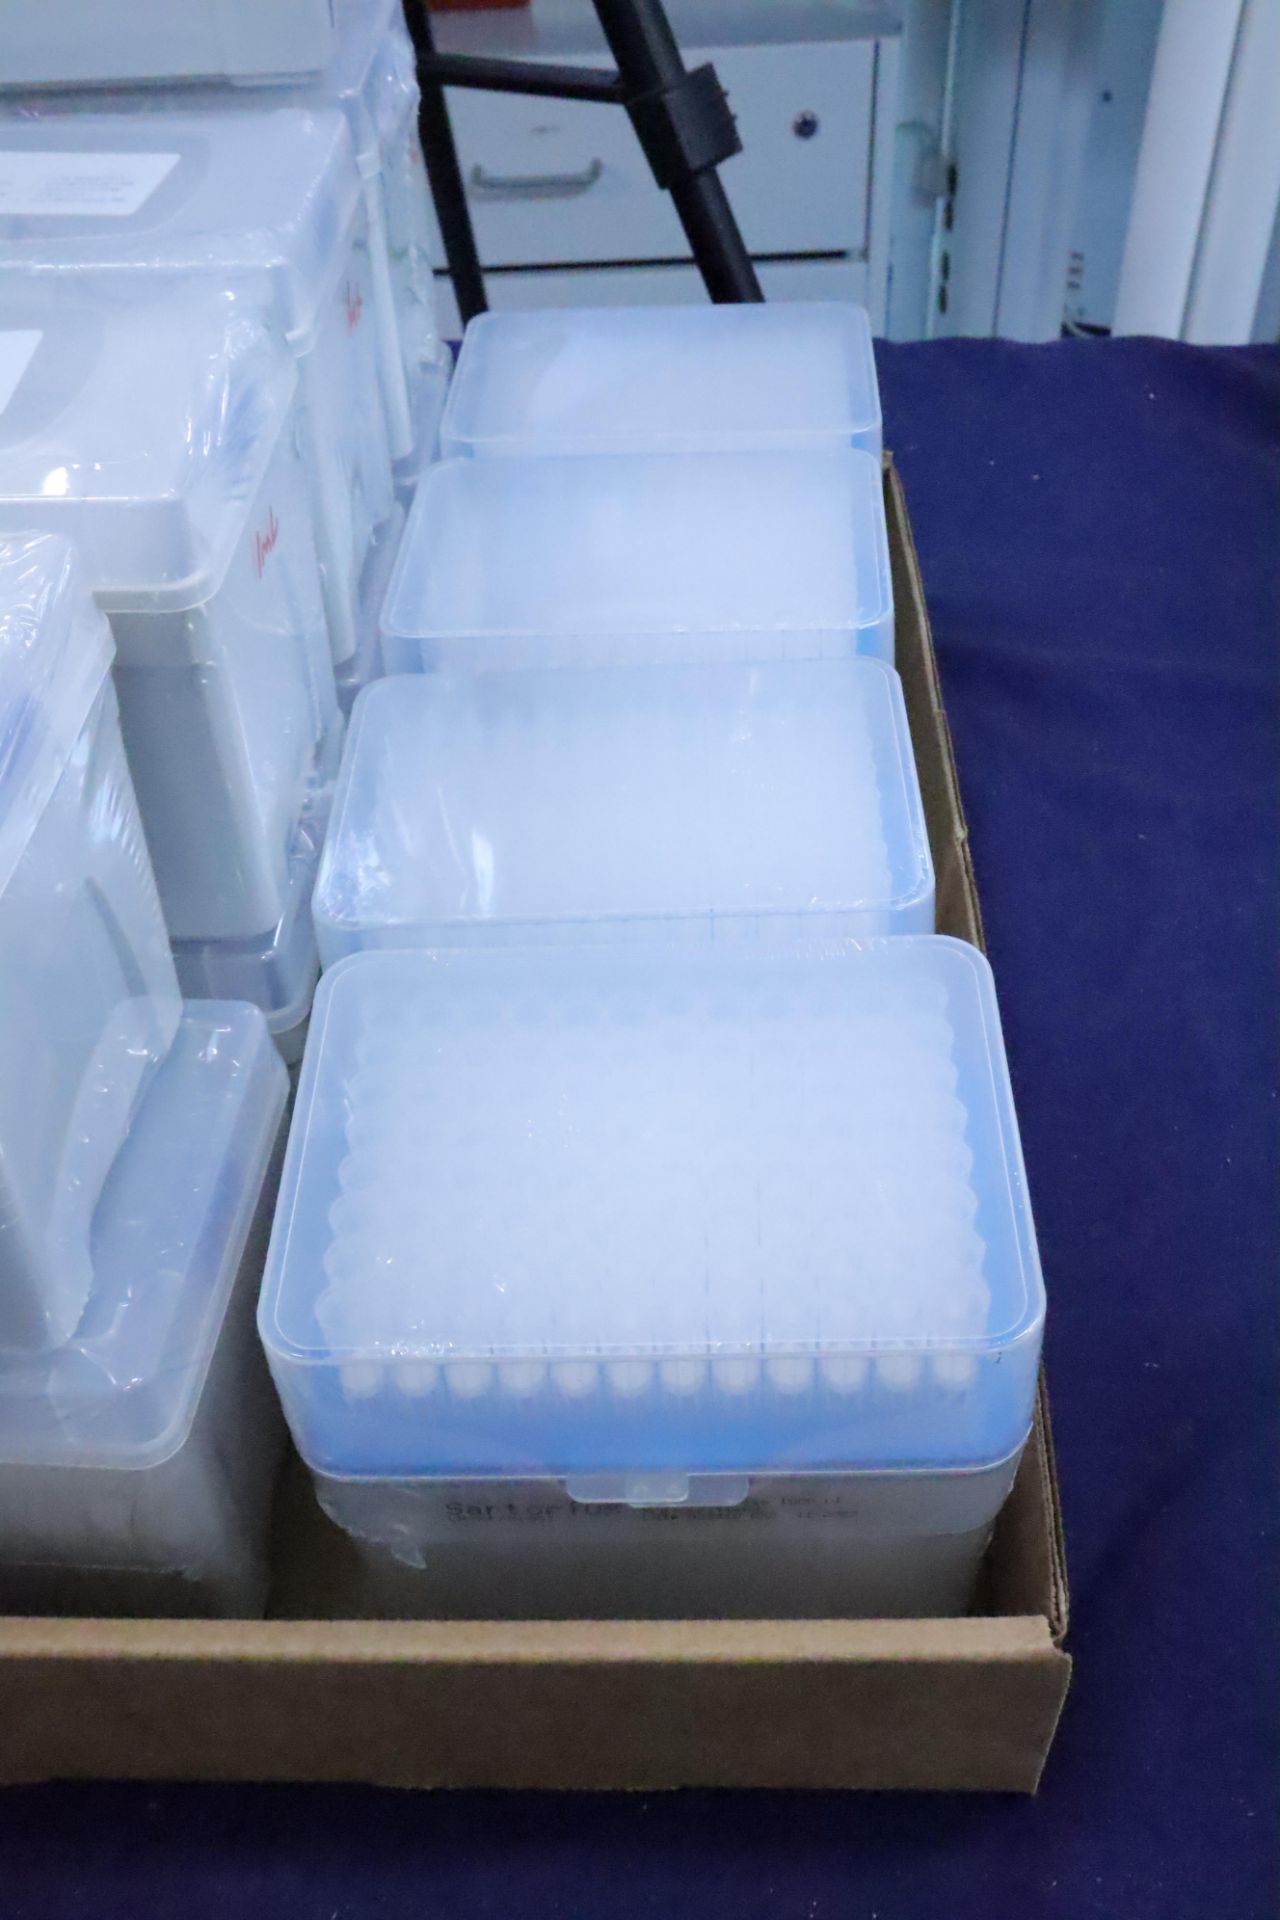 (NIB) Filter Pipette Tips 1000 uL / 96 tips per rack (Qty 34) - Image 4 of 5